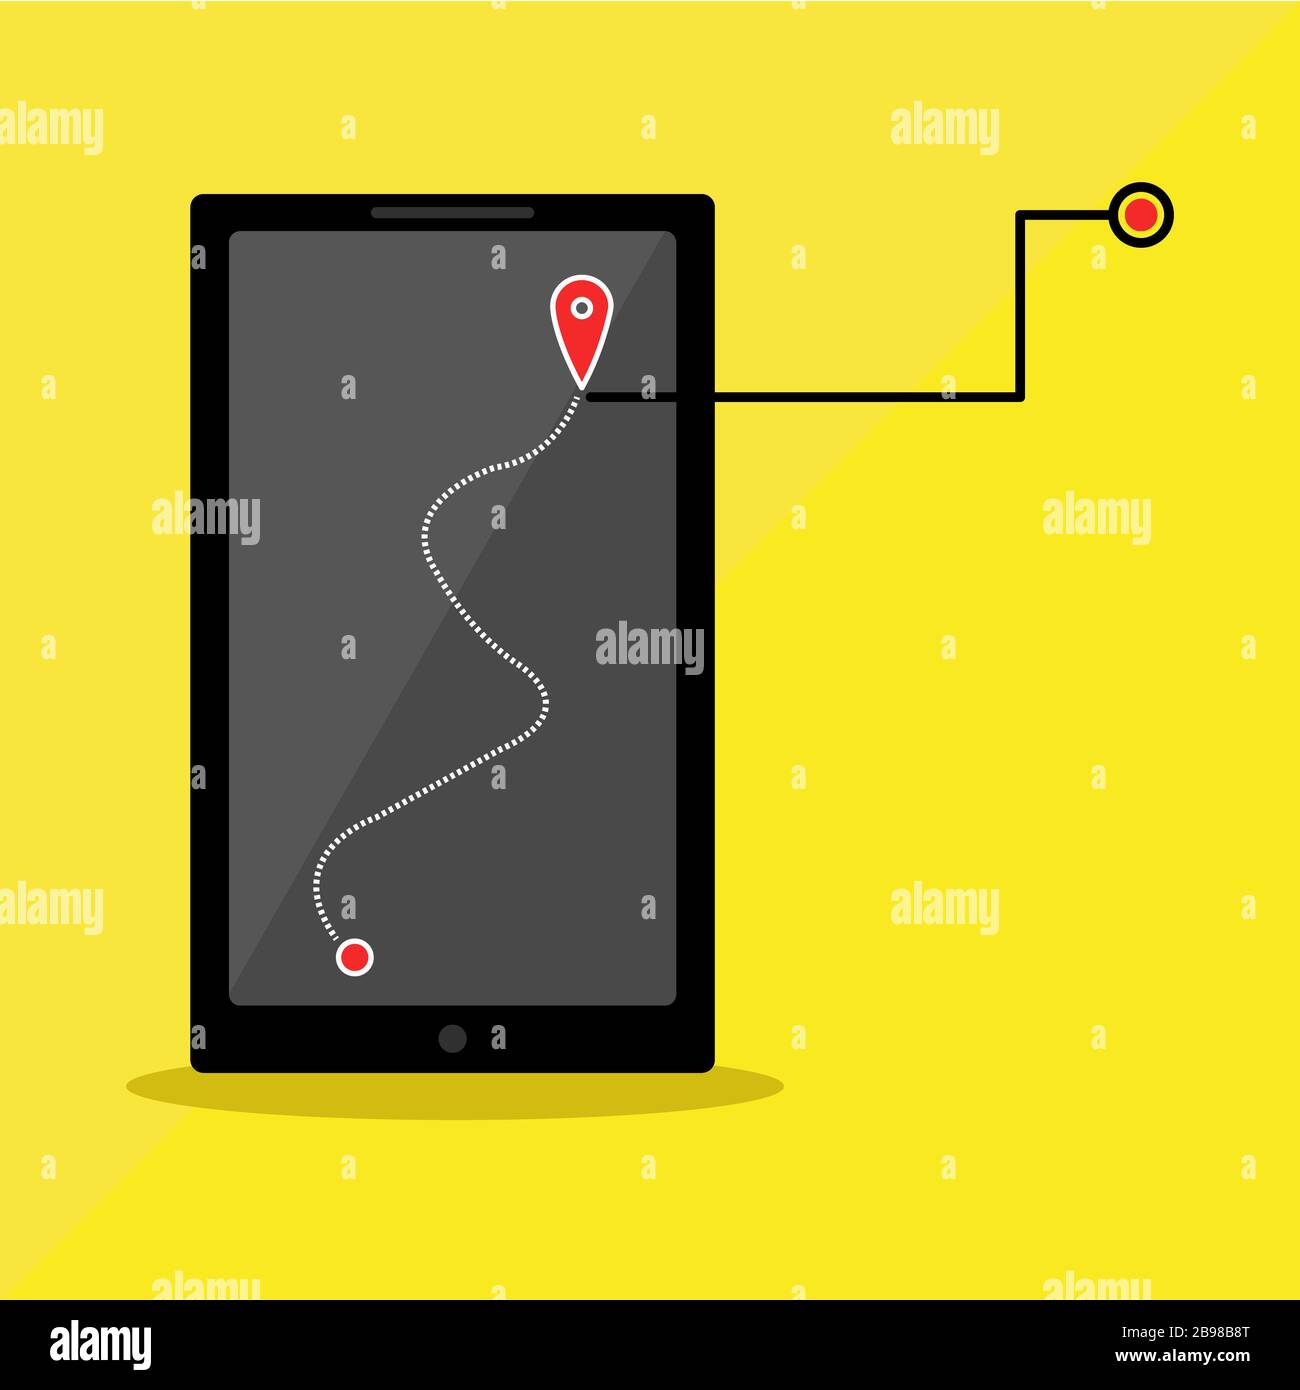 Flat Style Illustration of Map Tracking on Cell Phone Stock Photo